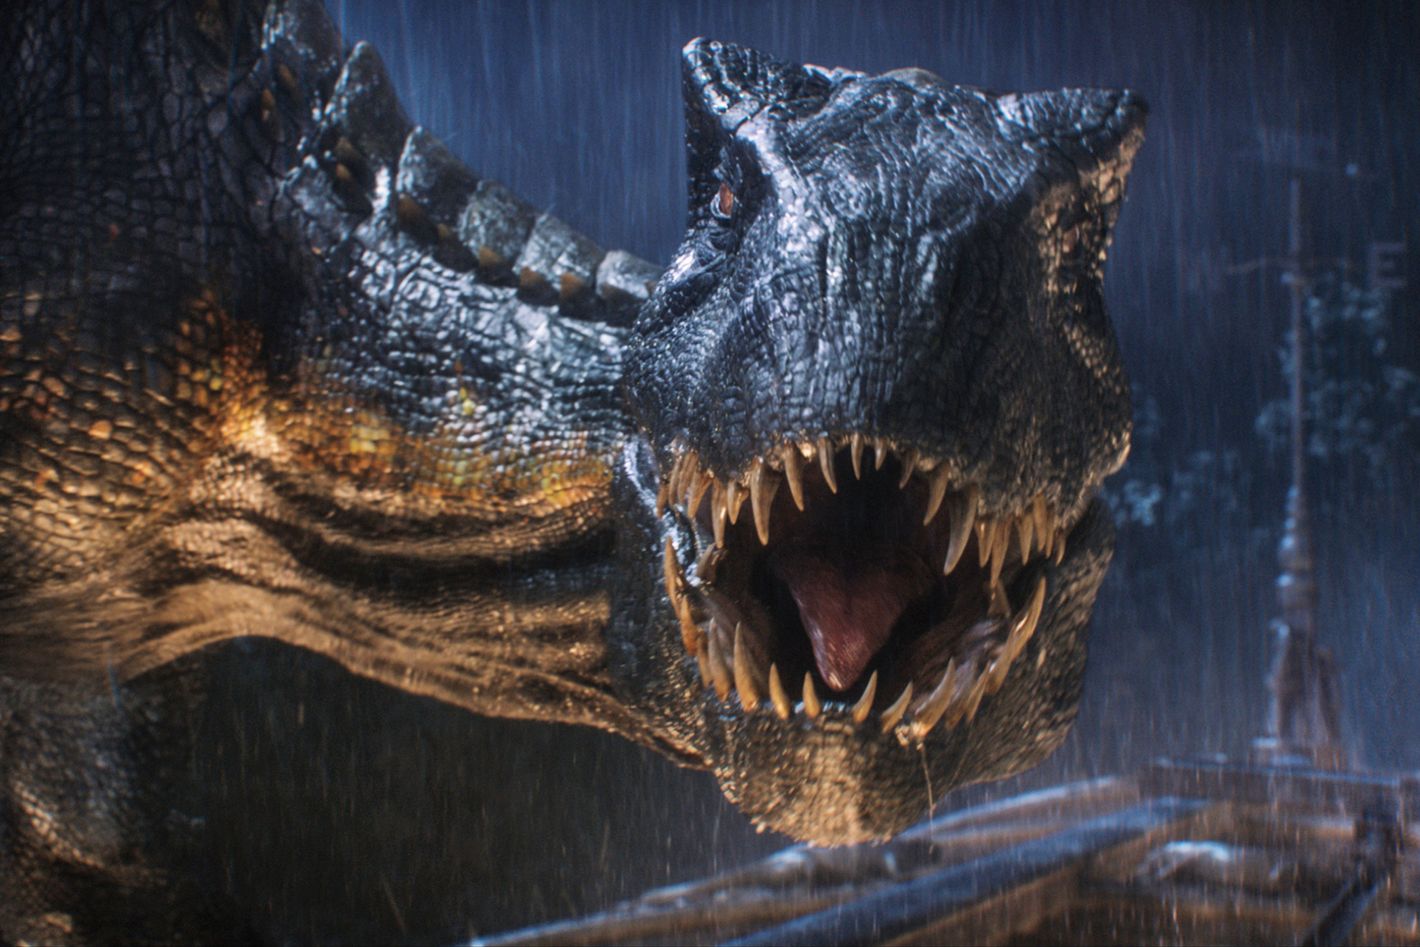 Why Do The Jurassic World Movies Keep Making Up Dinosaurs?